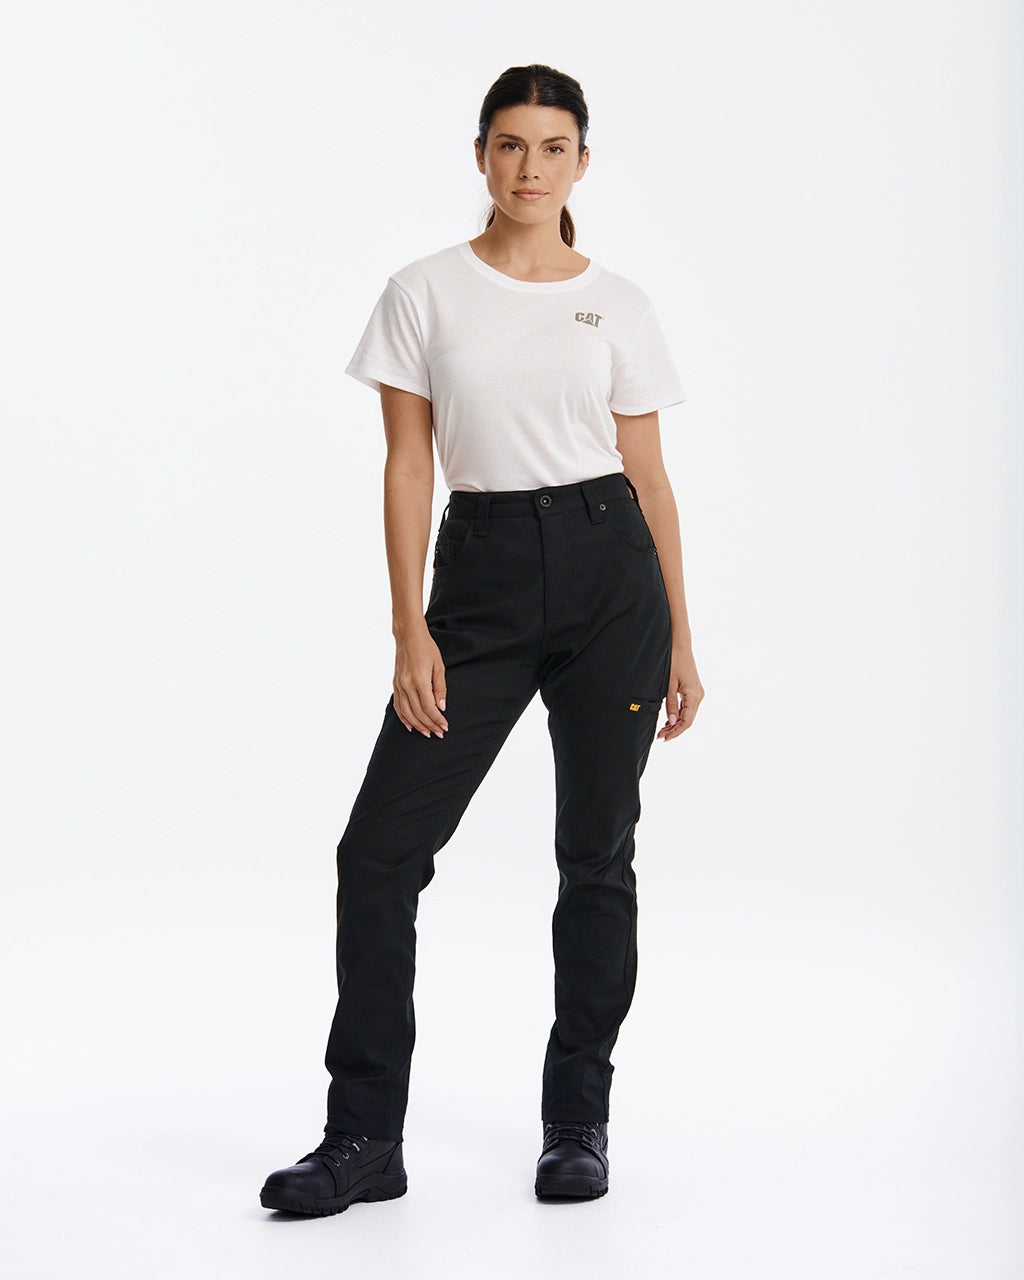 Womens Work Utility Safety Pants